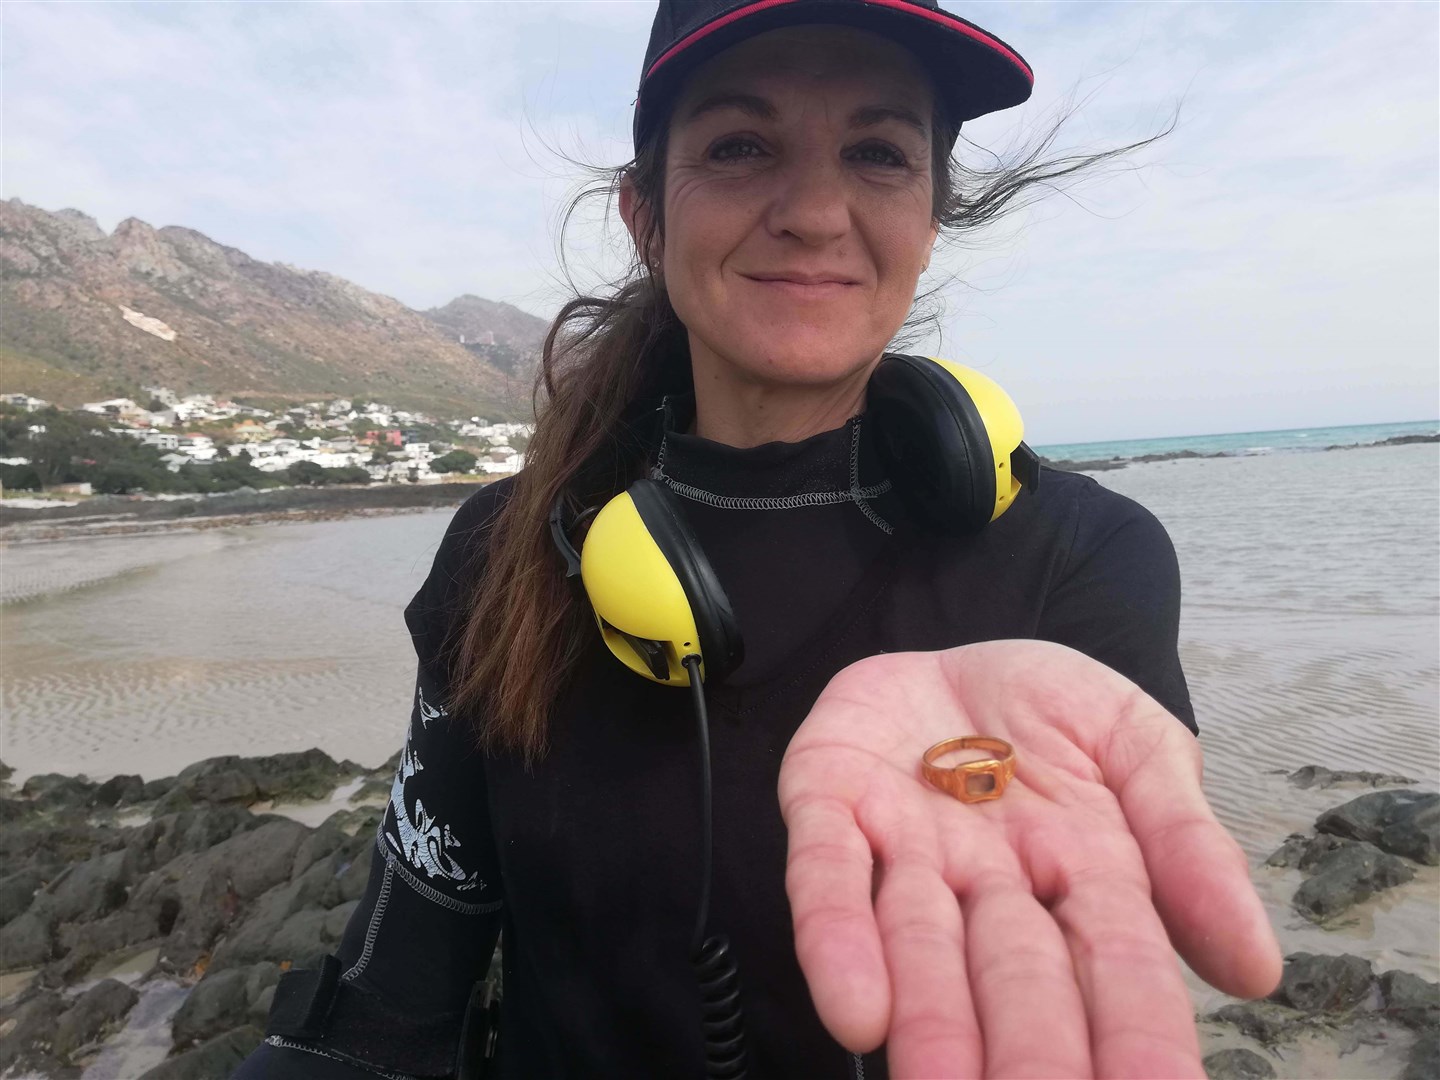 Cornell Swart with the mourning ring she found on a beach in South Africa. Picture courtesy of Cornell Swart.